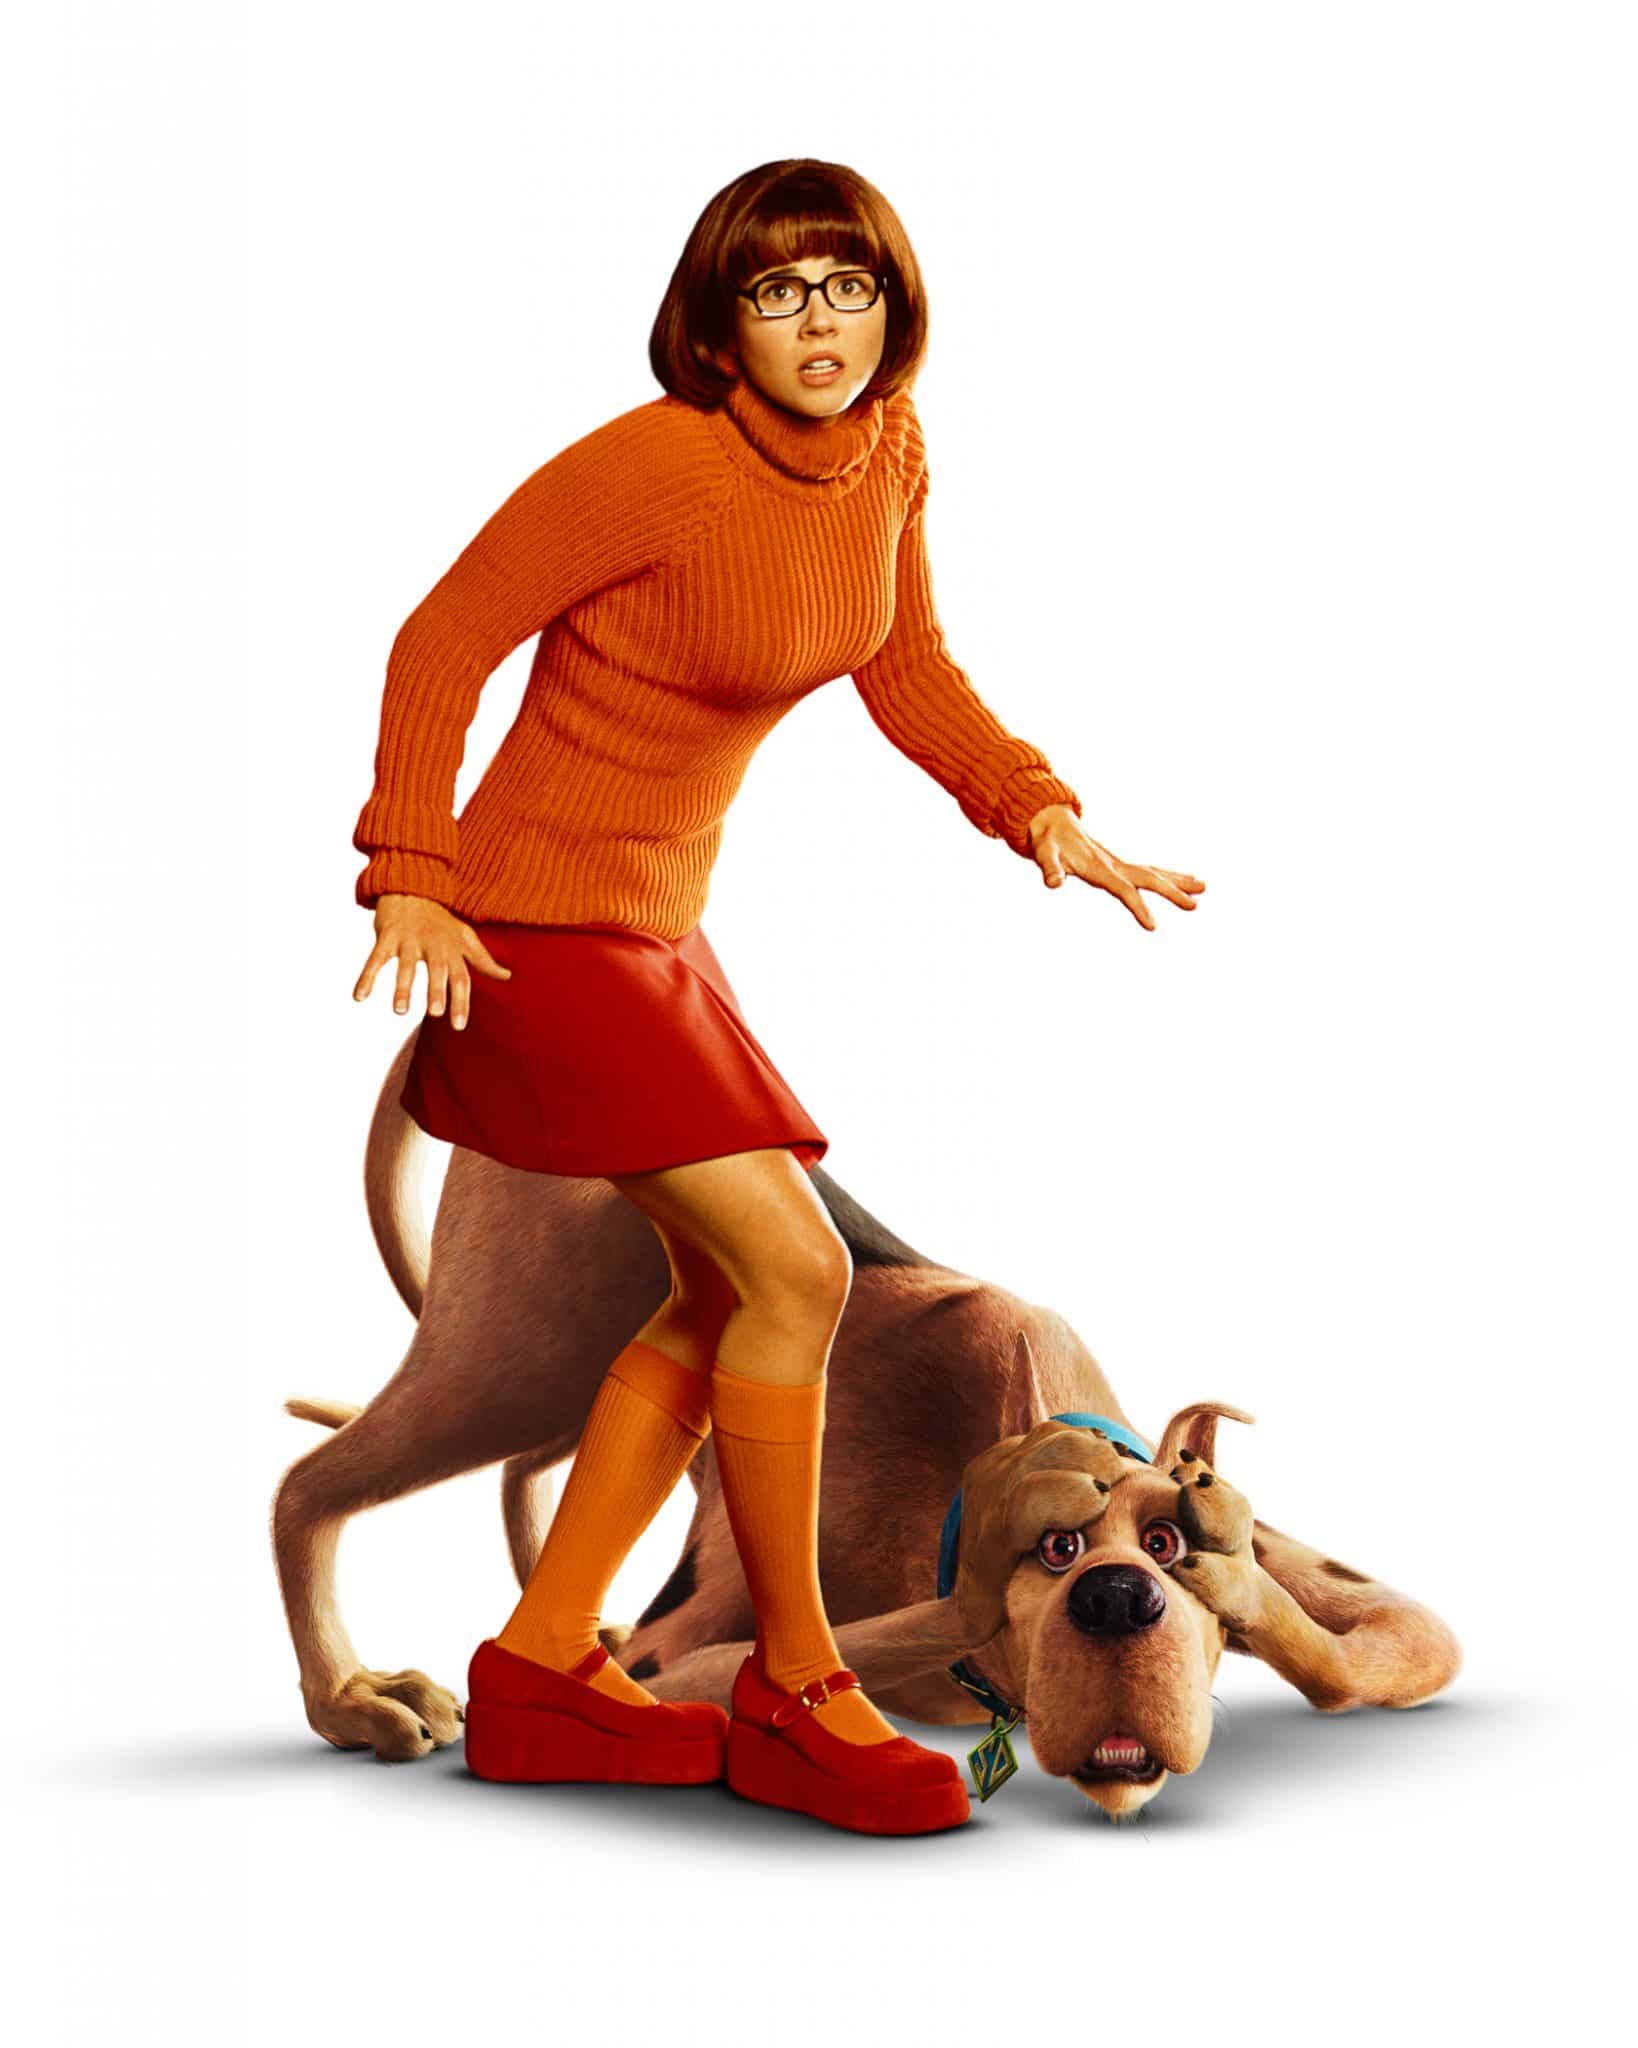 Scooby Doo’s Velma Was Supposed To Be A Lesbian In The 2002 Movie